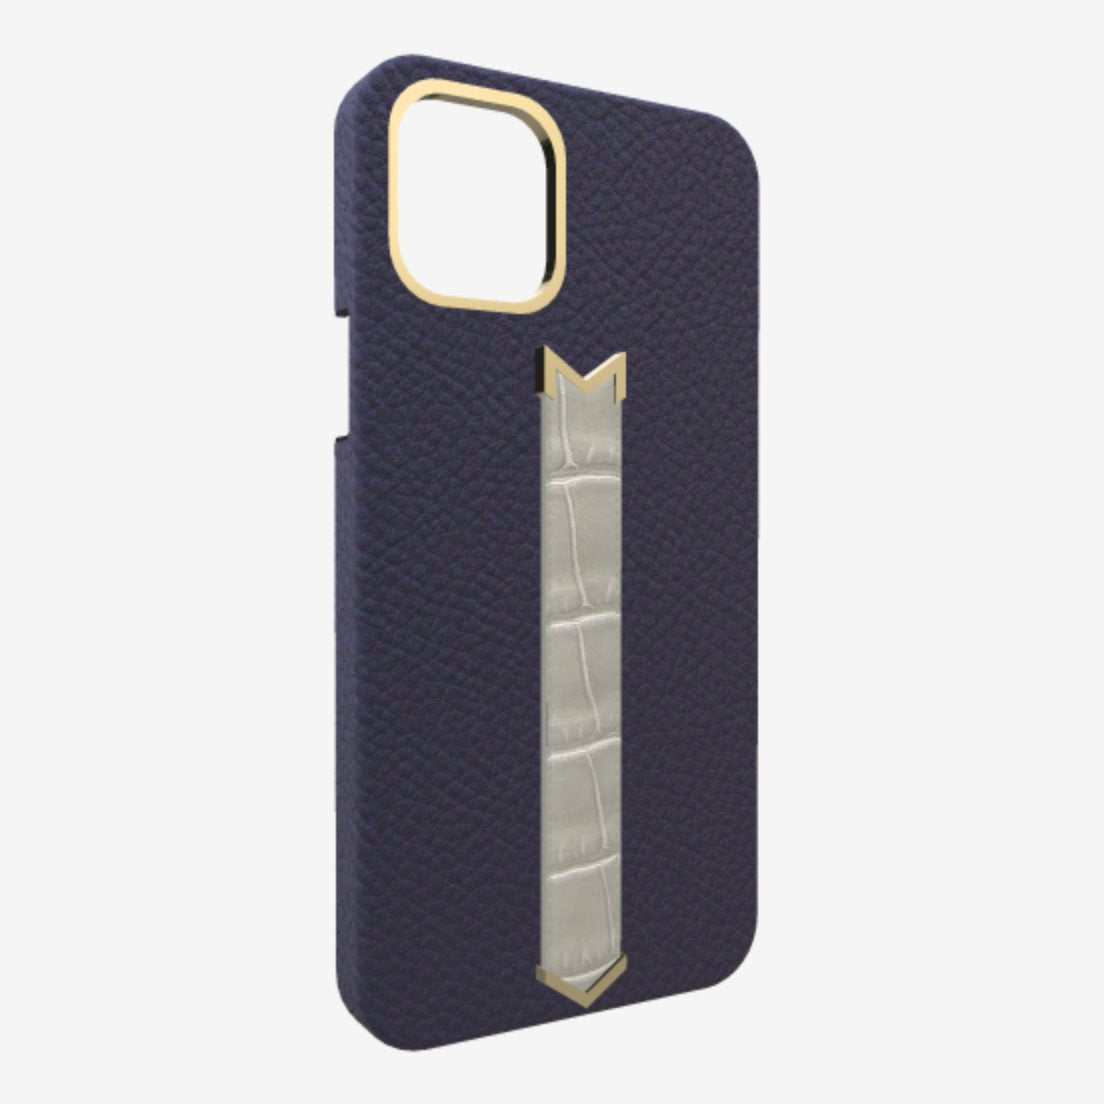 Gold Finger Strap Case for iPhone 13 in Genuine Calfskin and Alligator Navy Blue Pearl Grey 